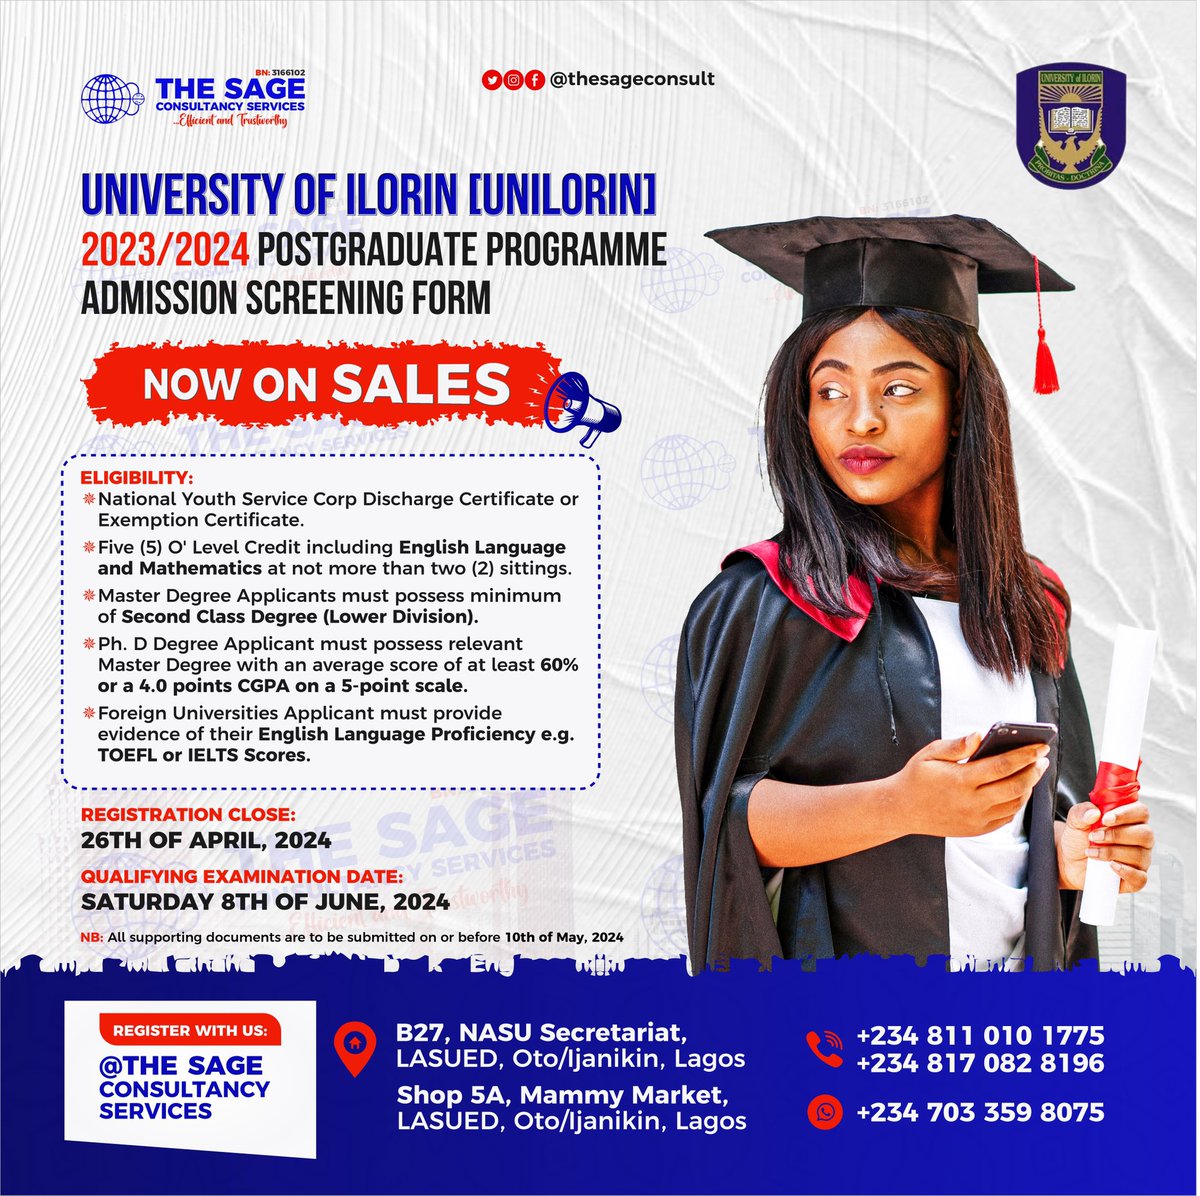 UNILORIN POST_GRADUATE PROGRAMS ADMISSION SCREENING FORM IS ONGOING!

Get your registration done with us today  @thesageconsult.
Click on the link in our bio or Chat via WhatsApp at +2347033598075 to communicate with us 

#THESAGECONSULTANCYSERVICES 
#DISTANCEISNOTABARRIER